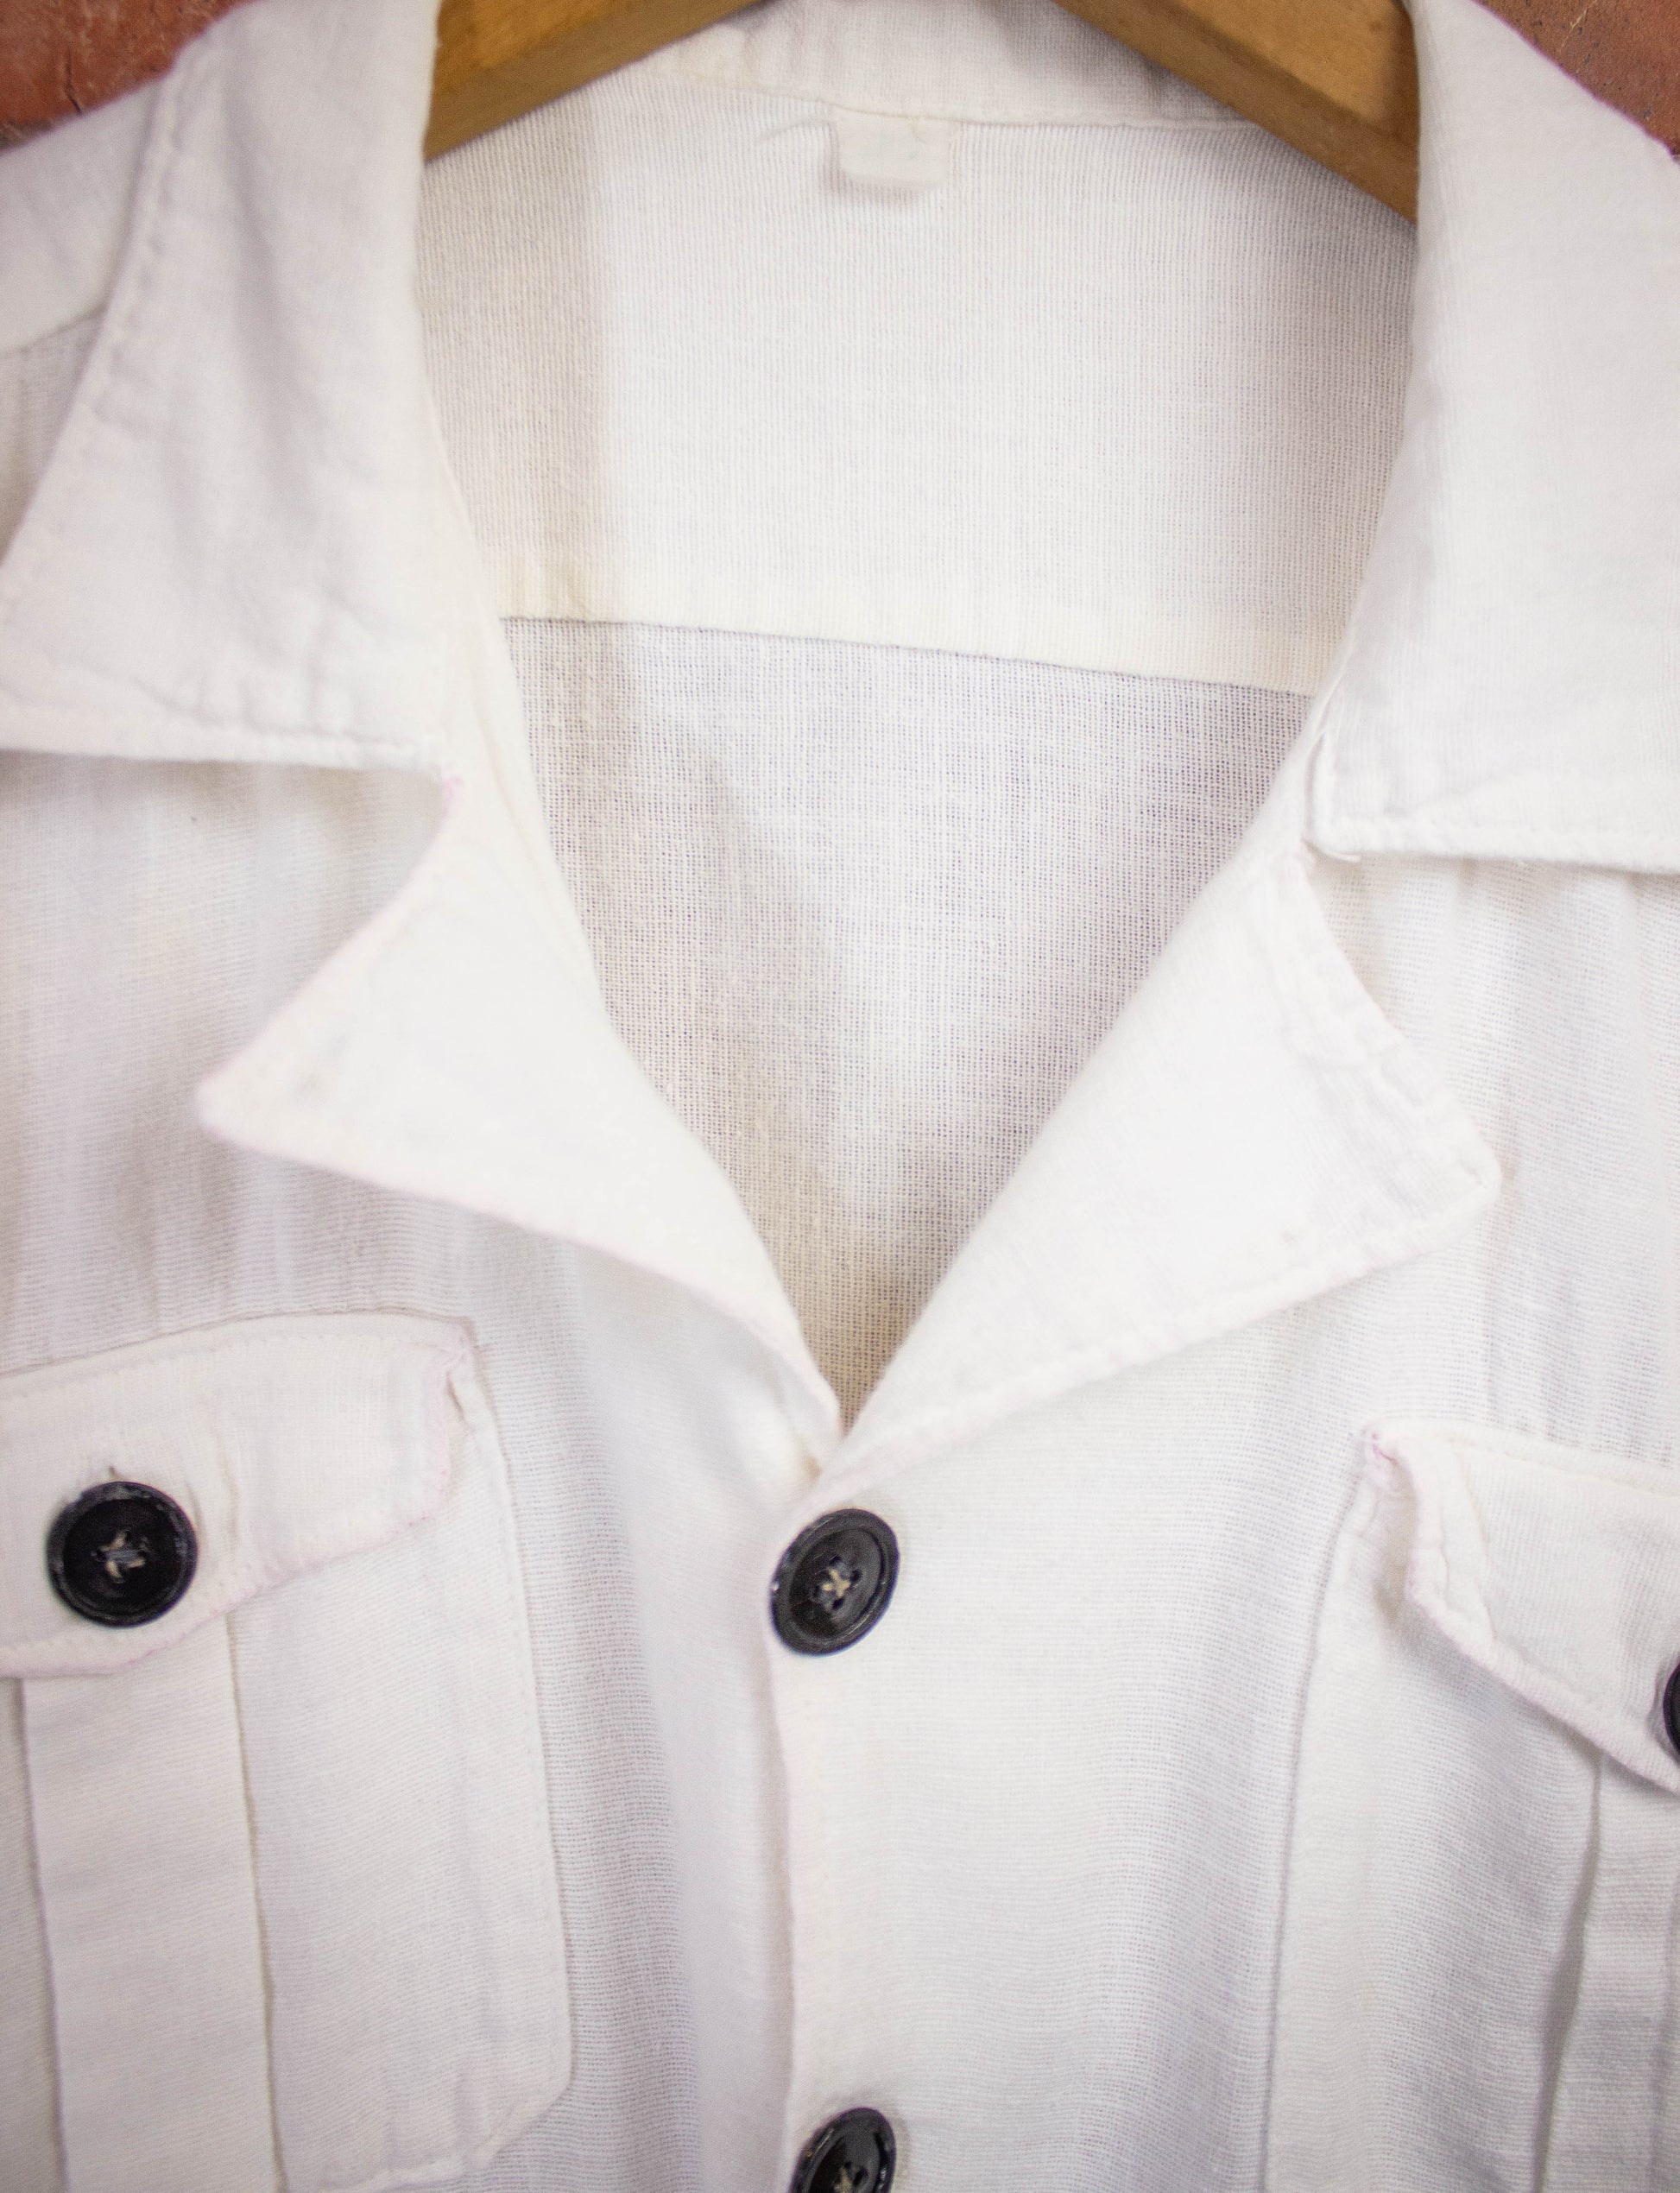 Vintage White Button Up Shirt with Black Buttons Small